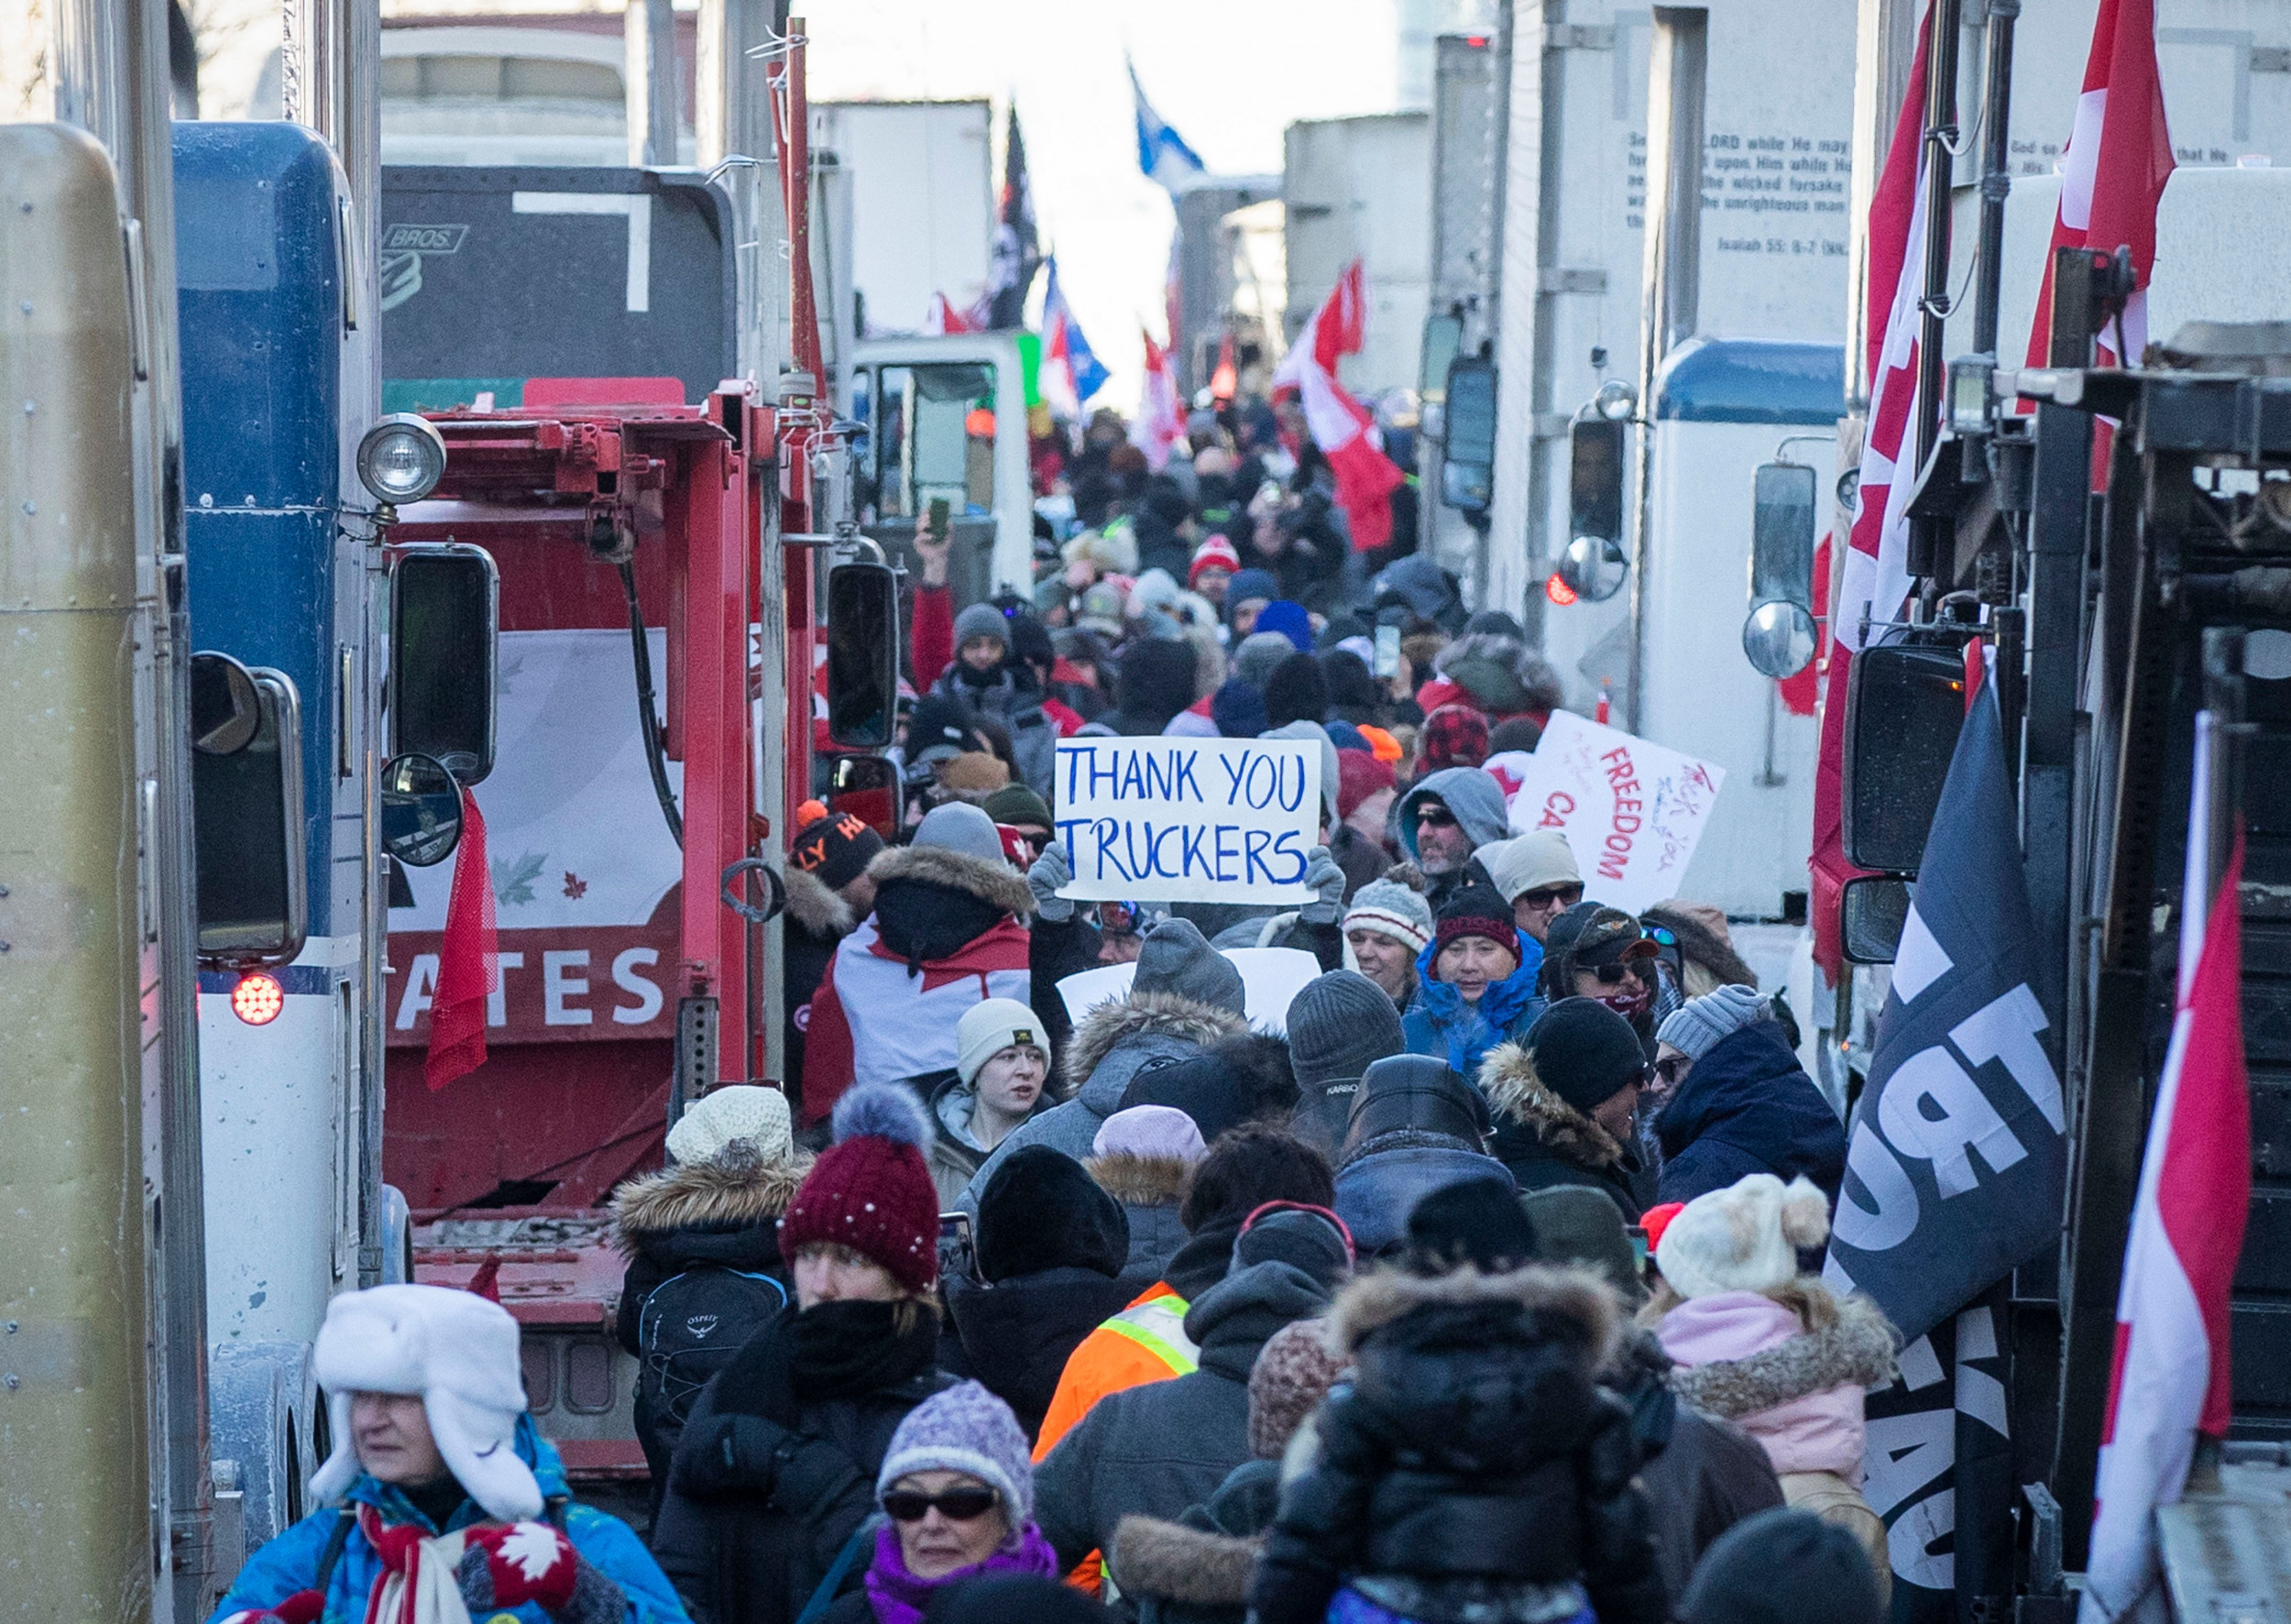 Truckers Protesting Covid Rules Has Gofundme Halted After Millions Raised